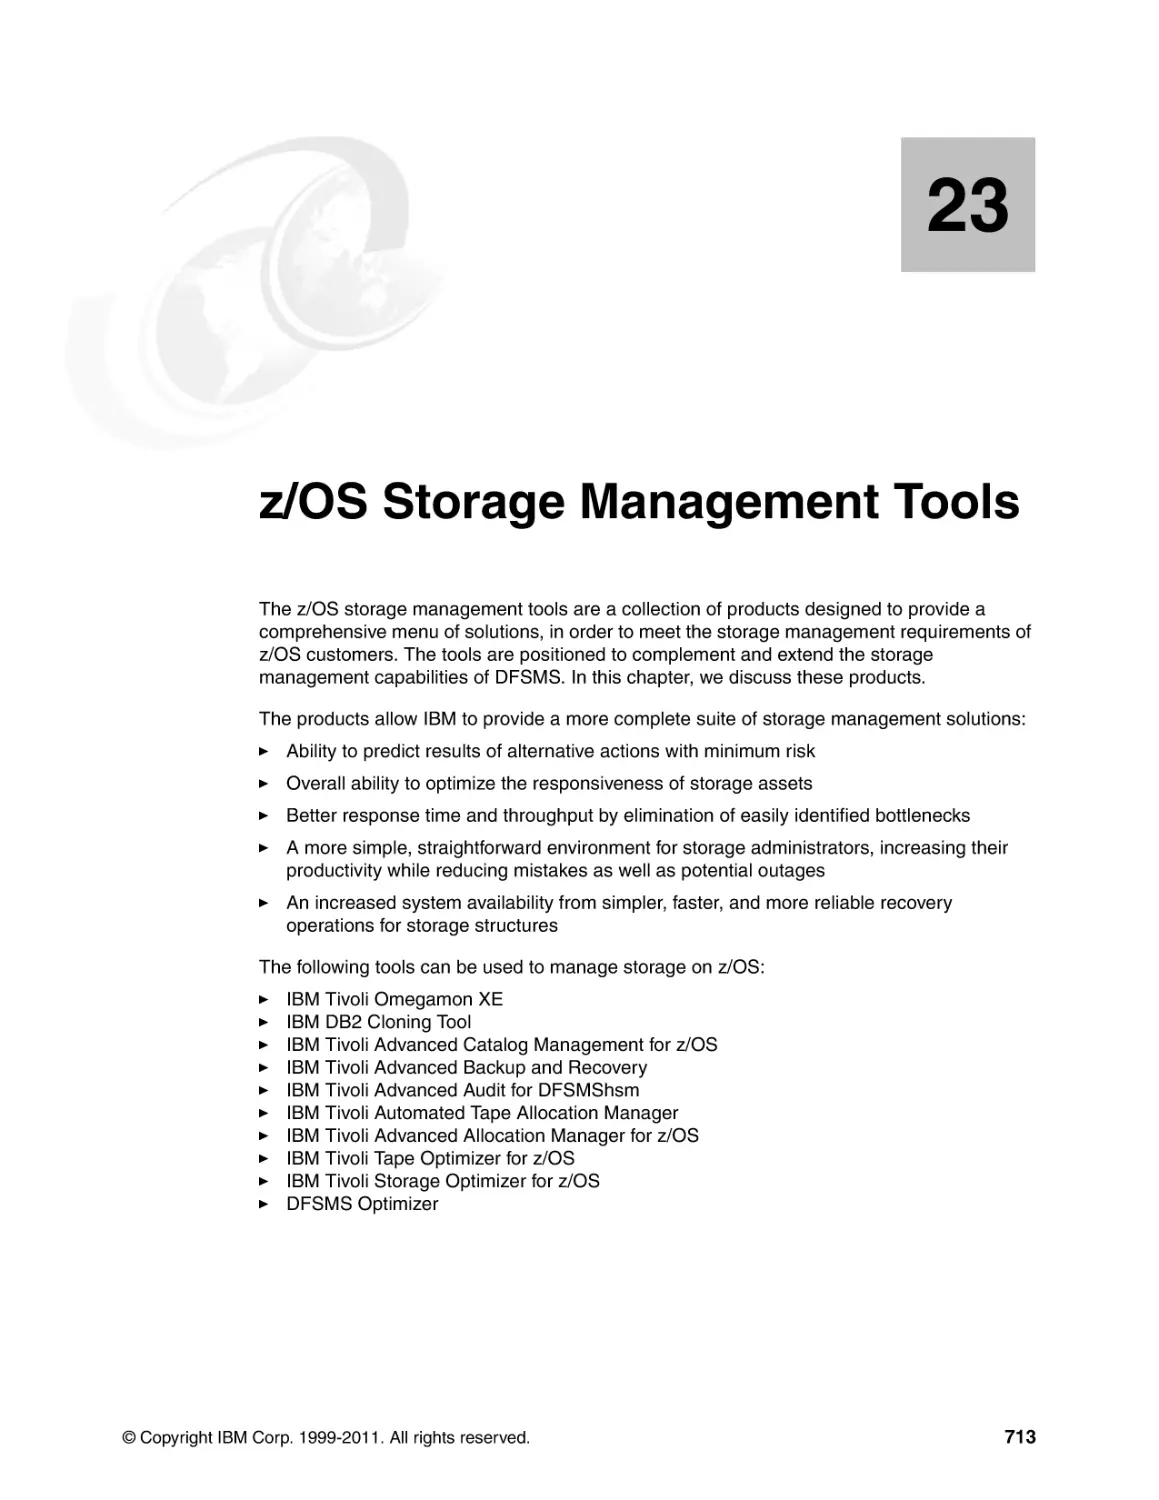 Chapter 23. z/OS Storage Management Tools